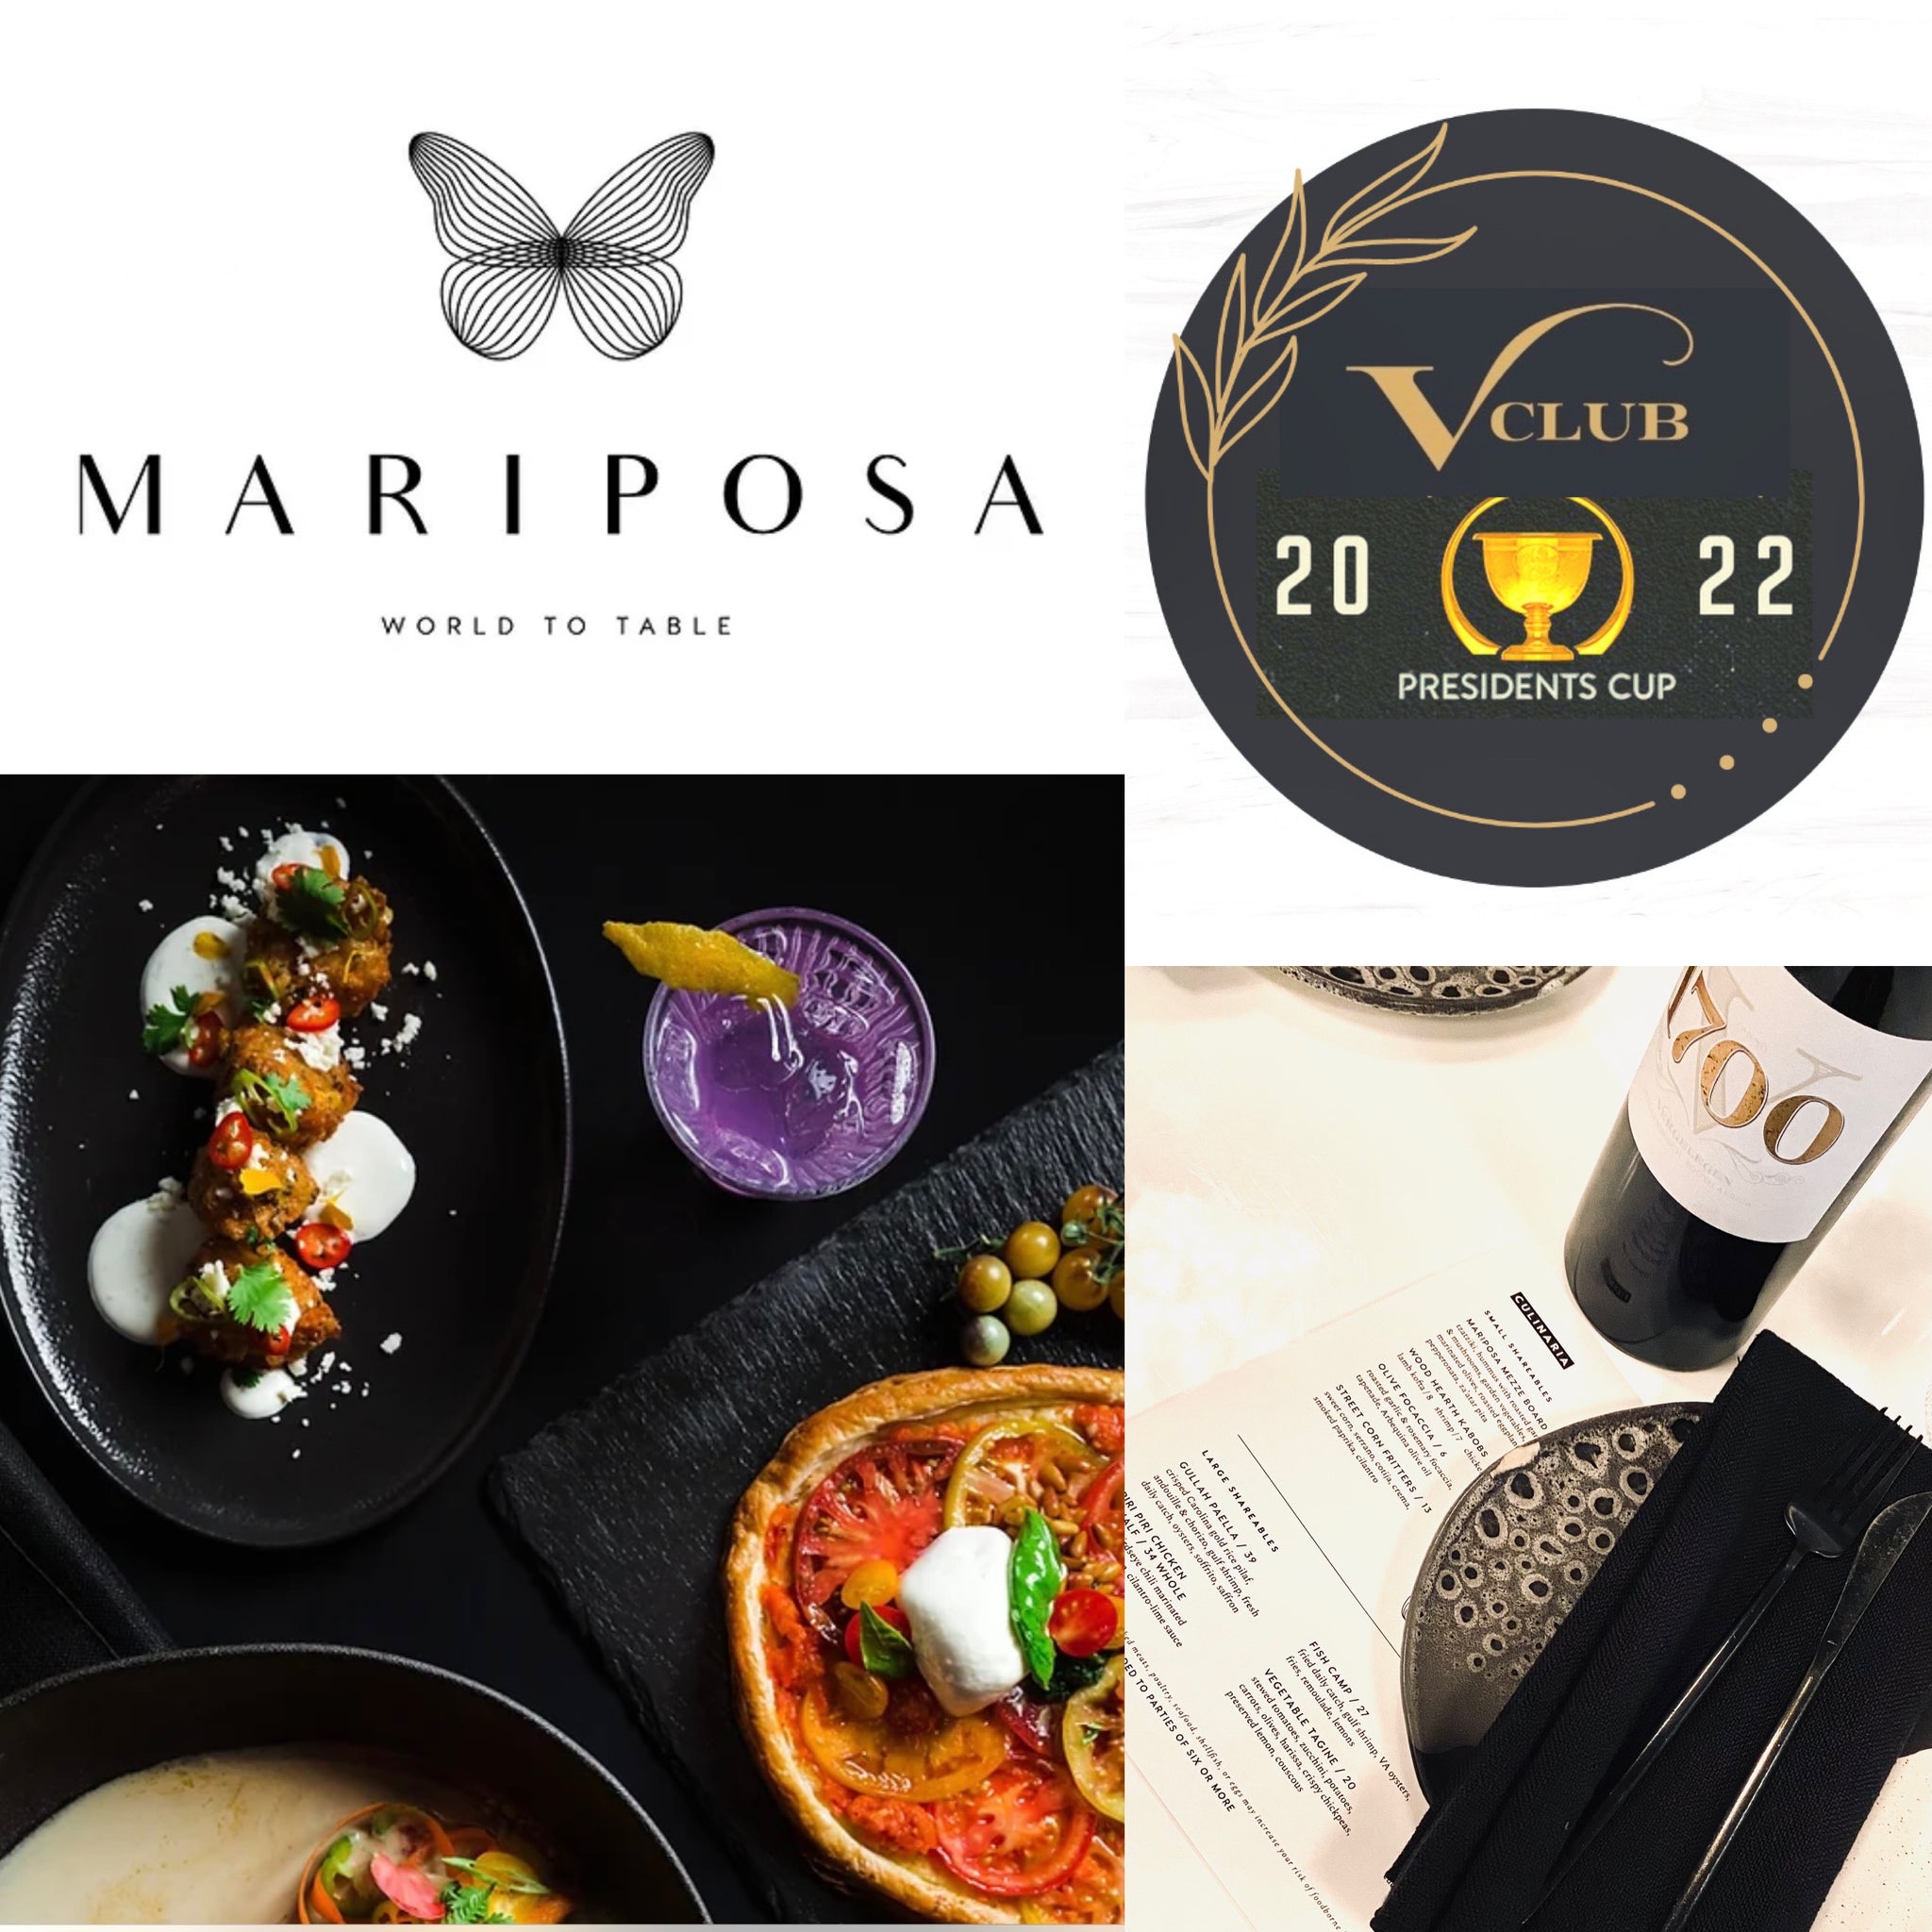 VClub dinner at Mariposa - and the debut of V1700 in the US!